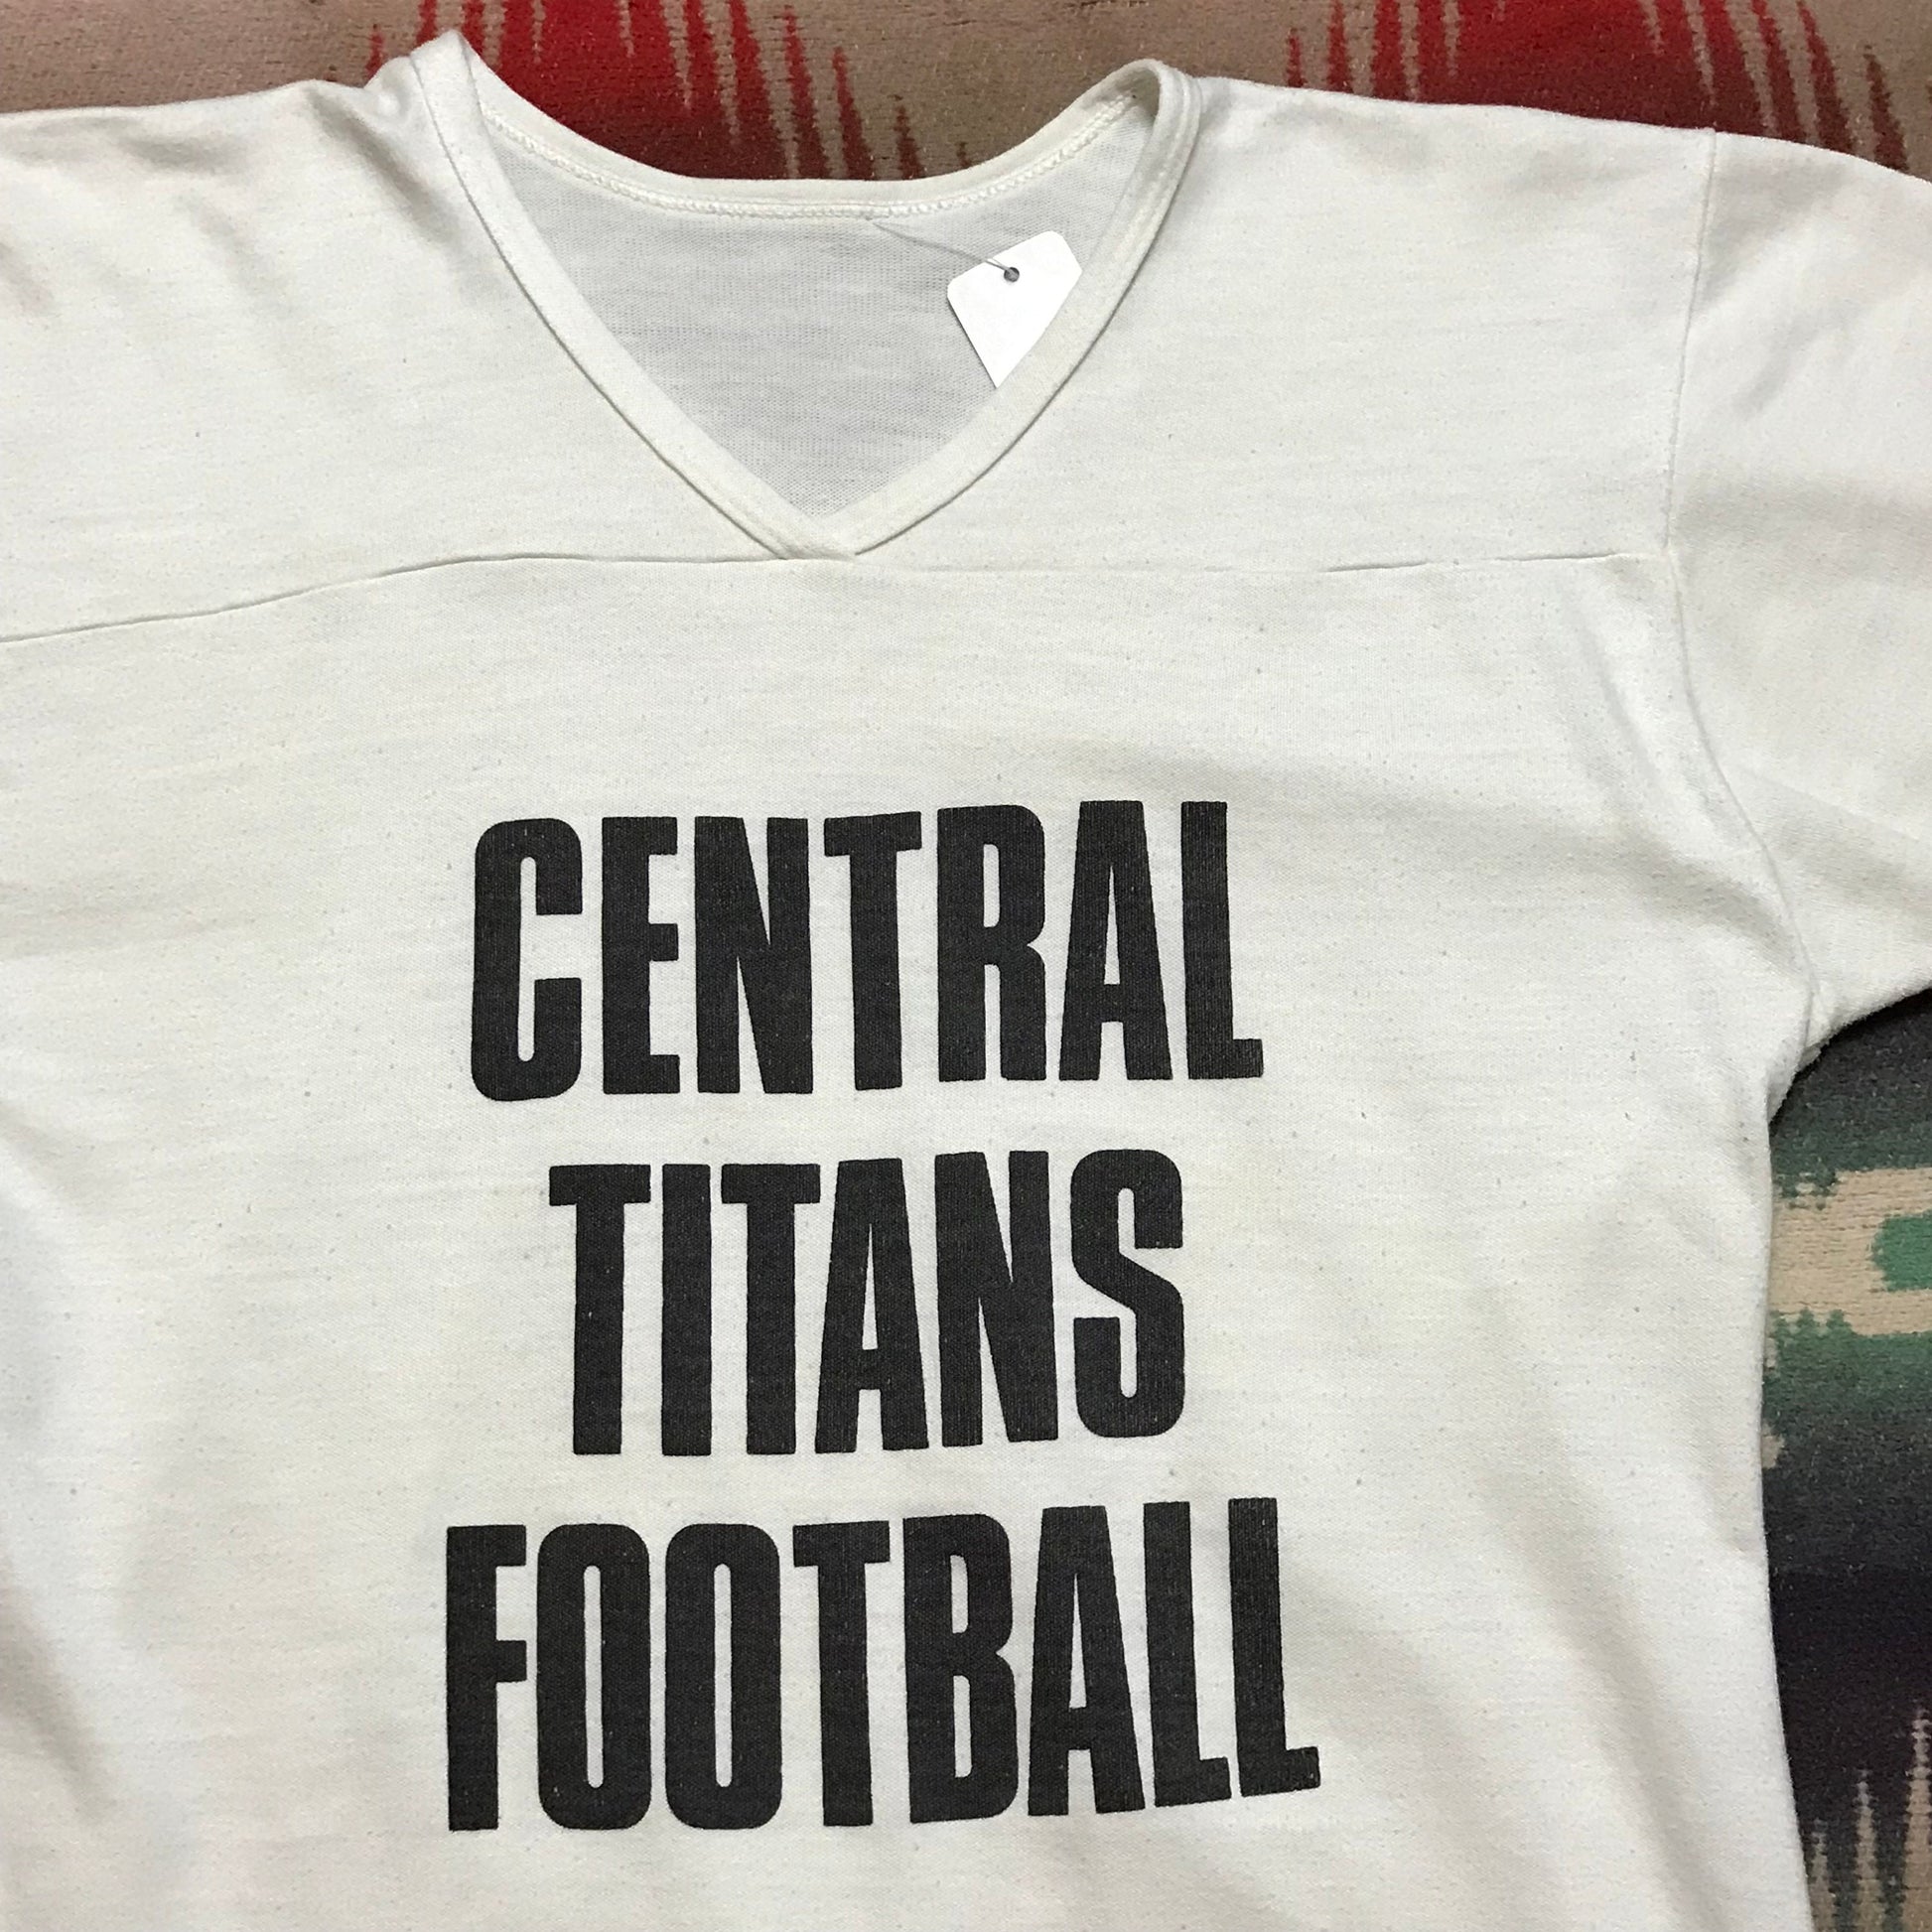 1970s/1980s Central Titans Football Jersey Made in USA Size M